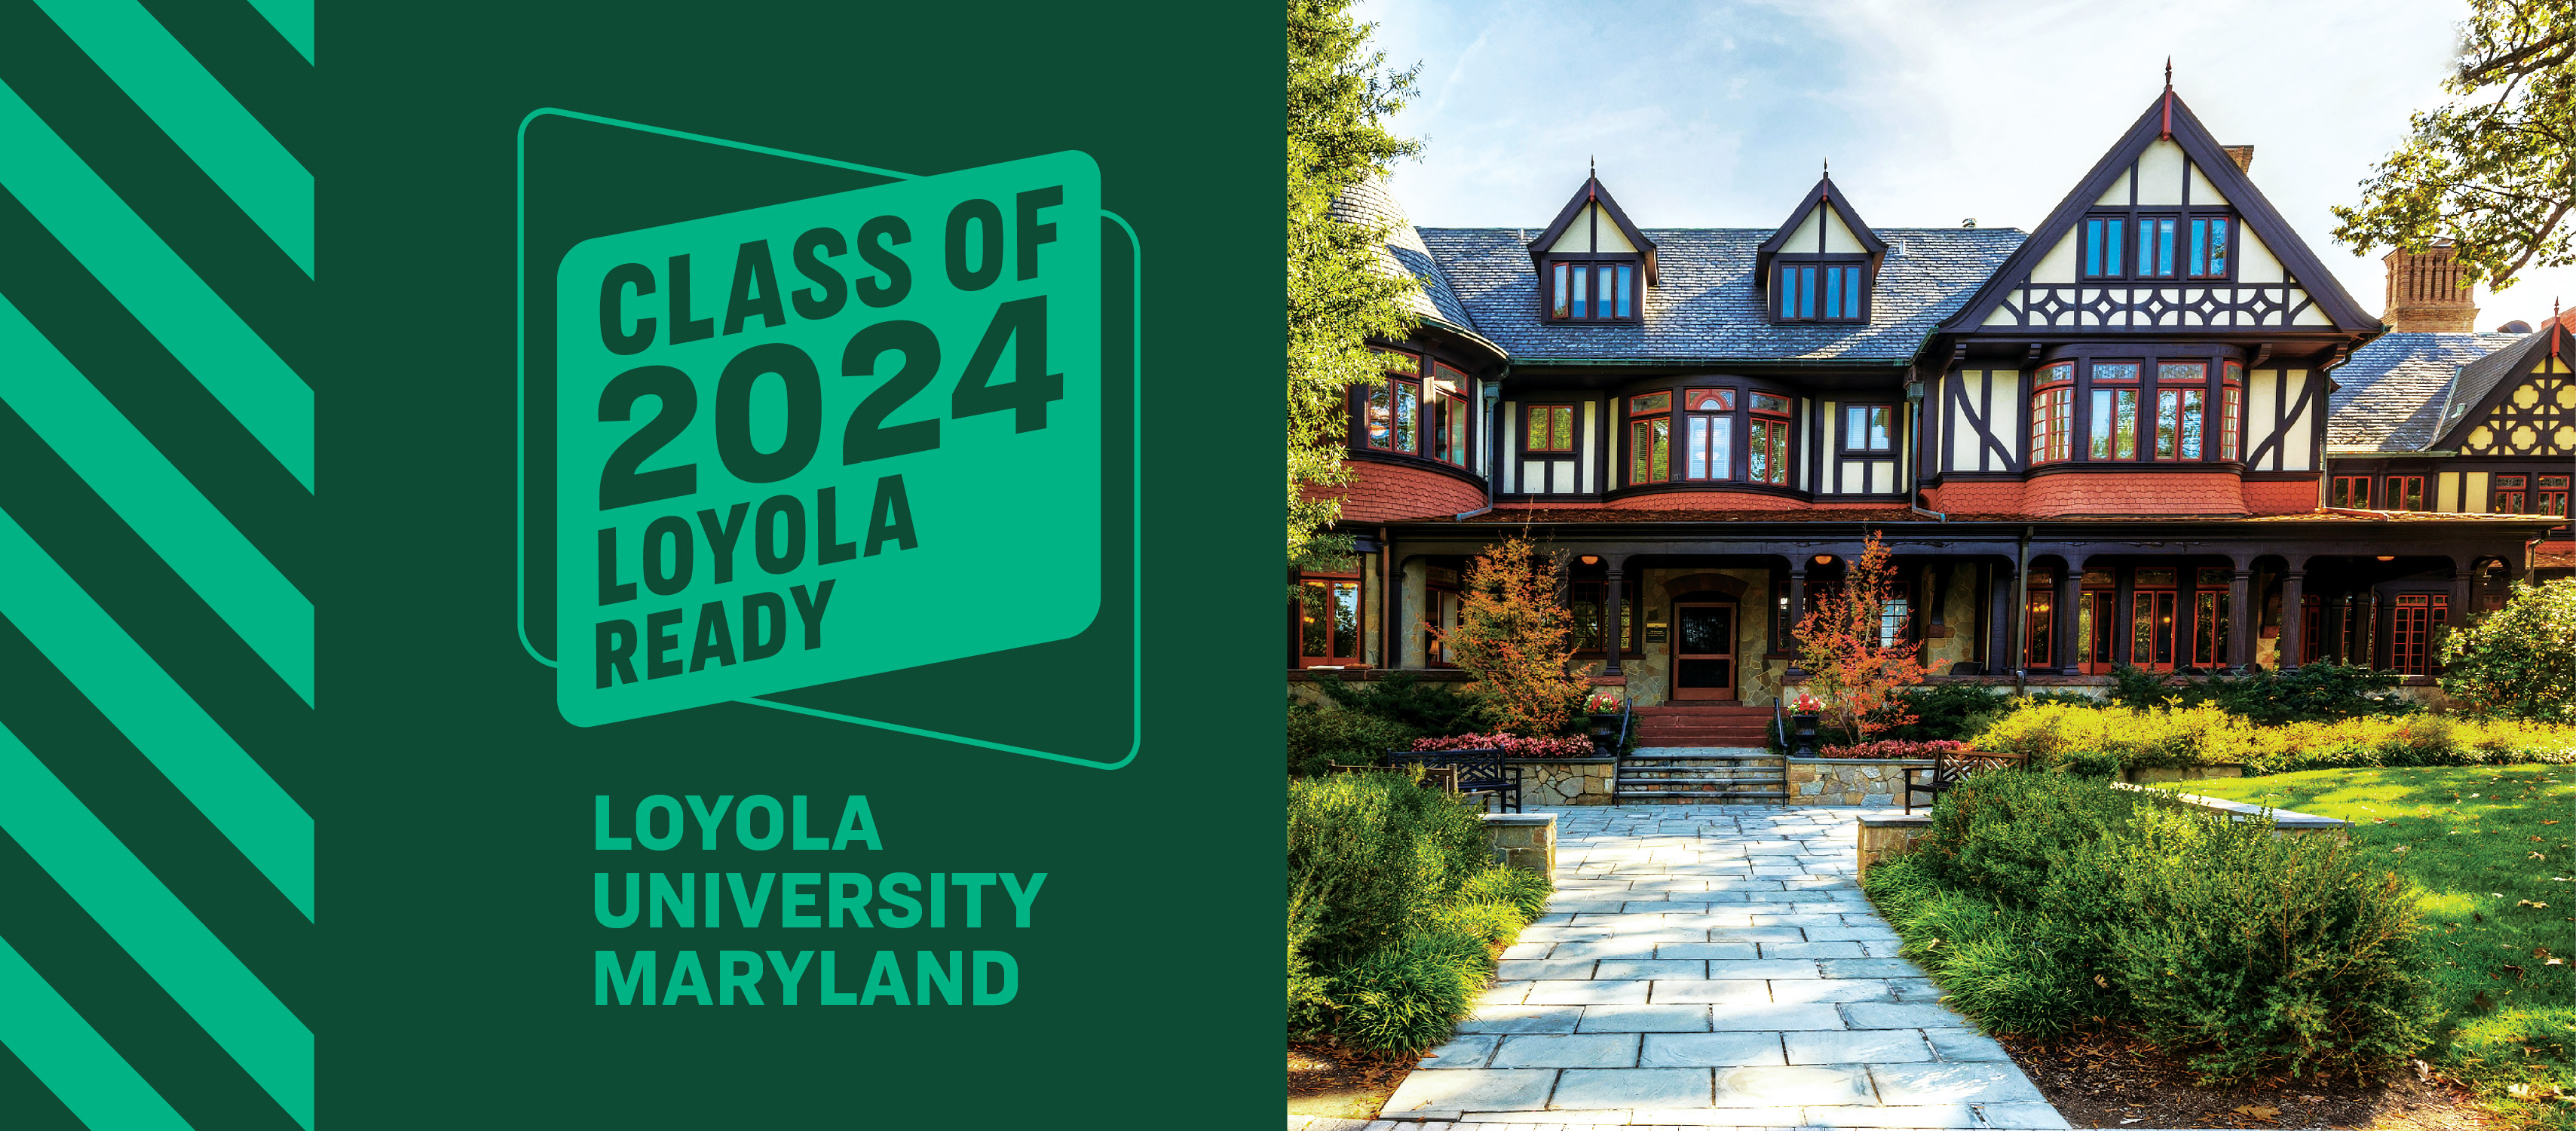 Facebook Cover: Class of 2023 Ready for Everything Loyola University Maryland with Humanities Building photo